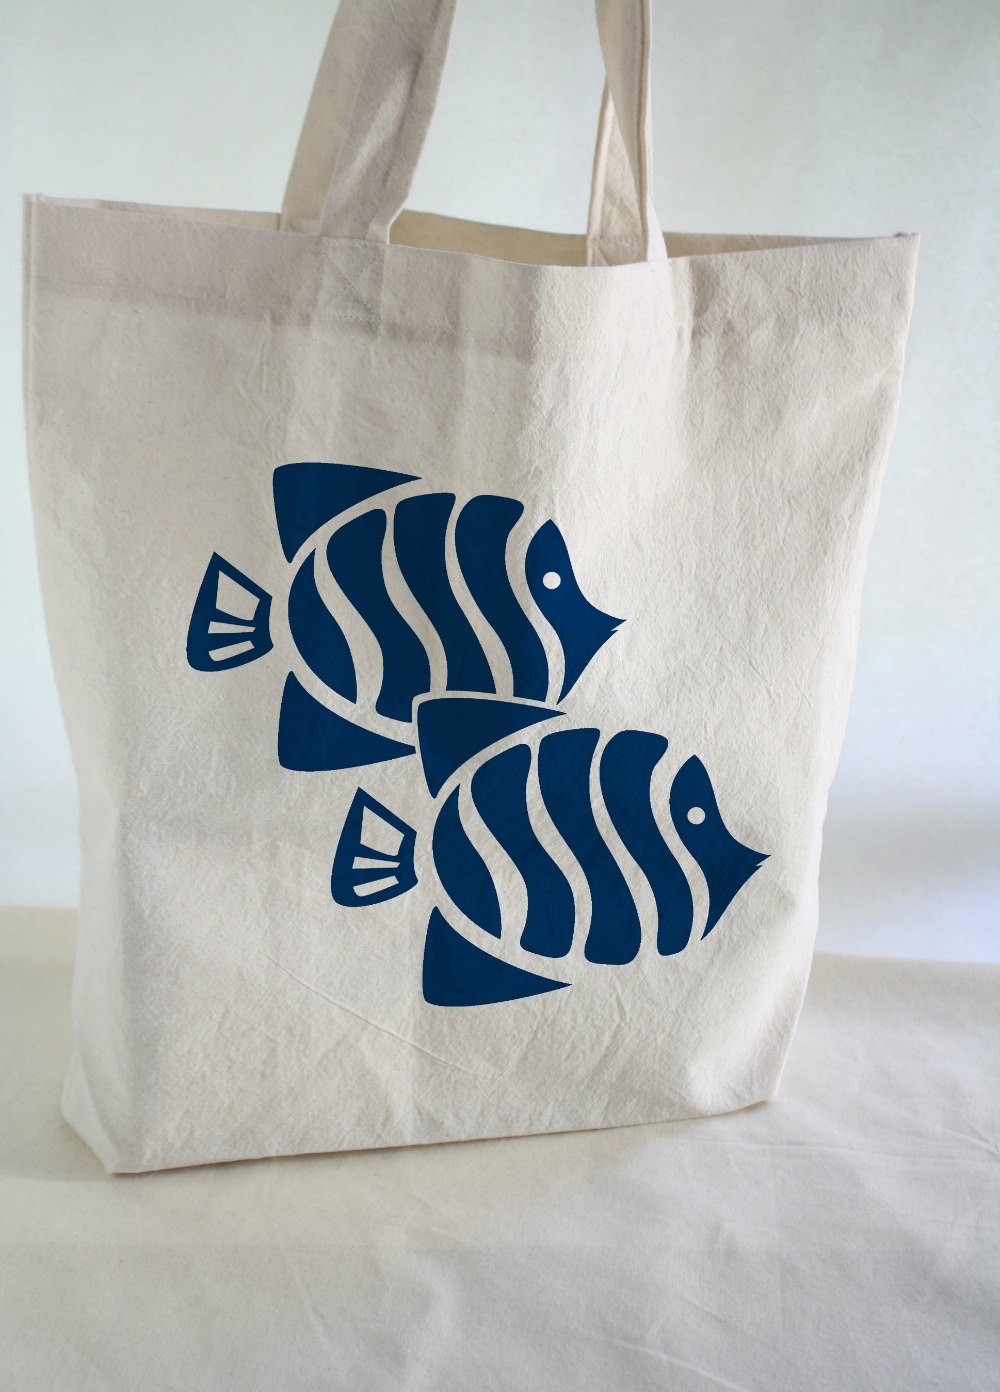 Cotton TOTE BAG - Beach Tote - Cotton Tote Bag With Hand Printed Fishes on Luulla